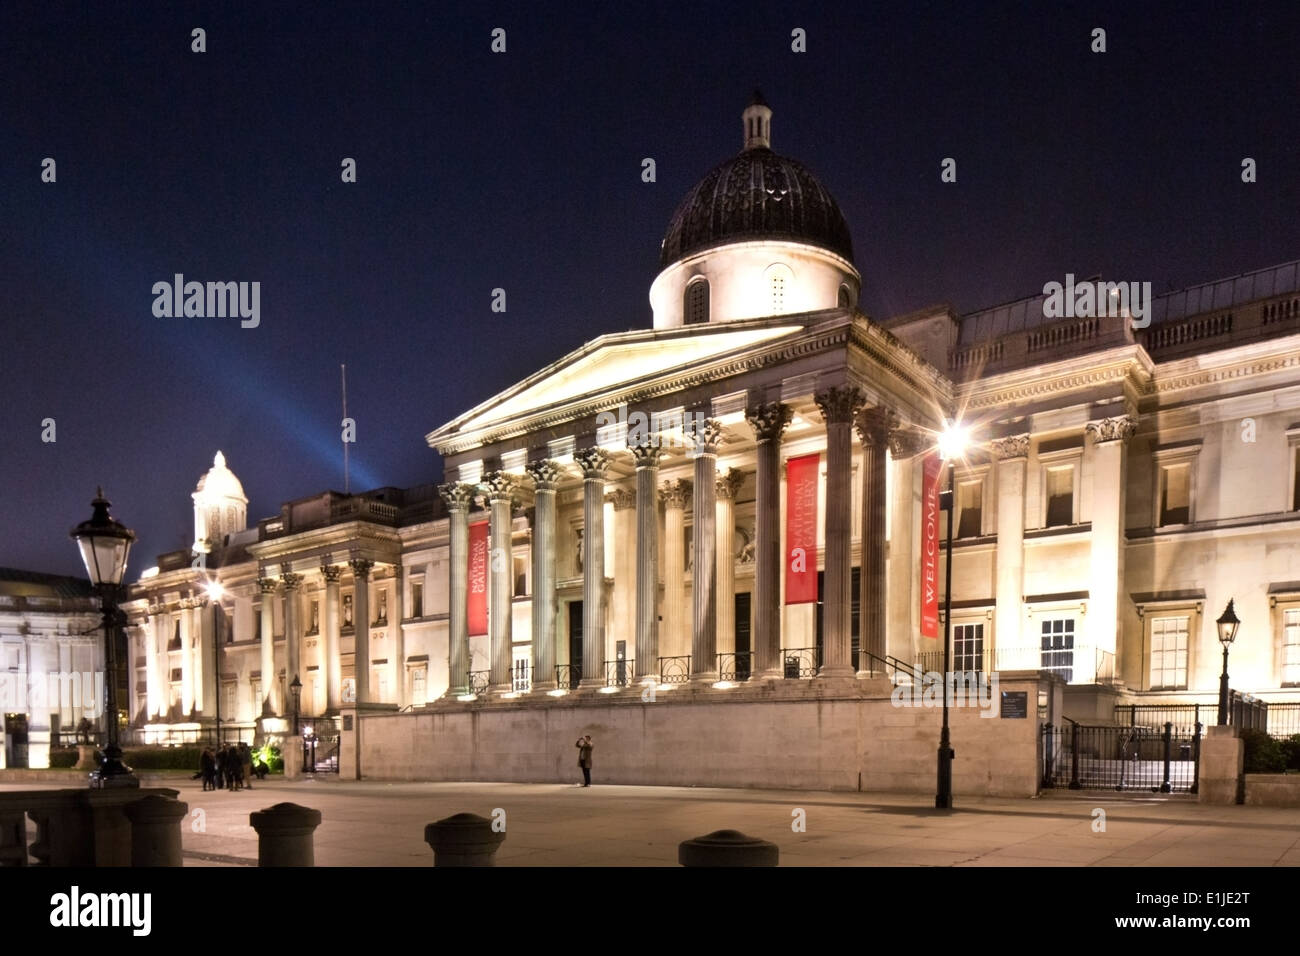 The National Gallery in London. Stock Photo